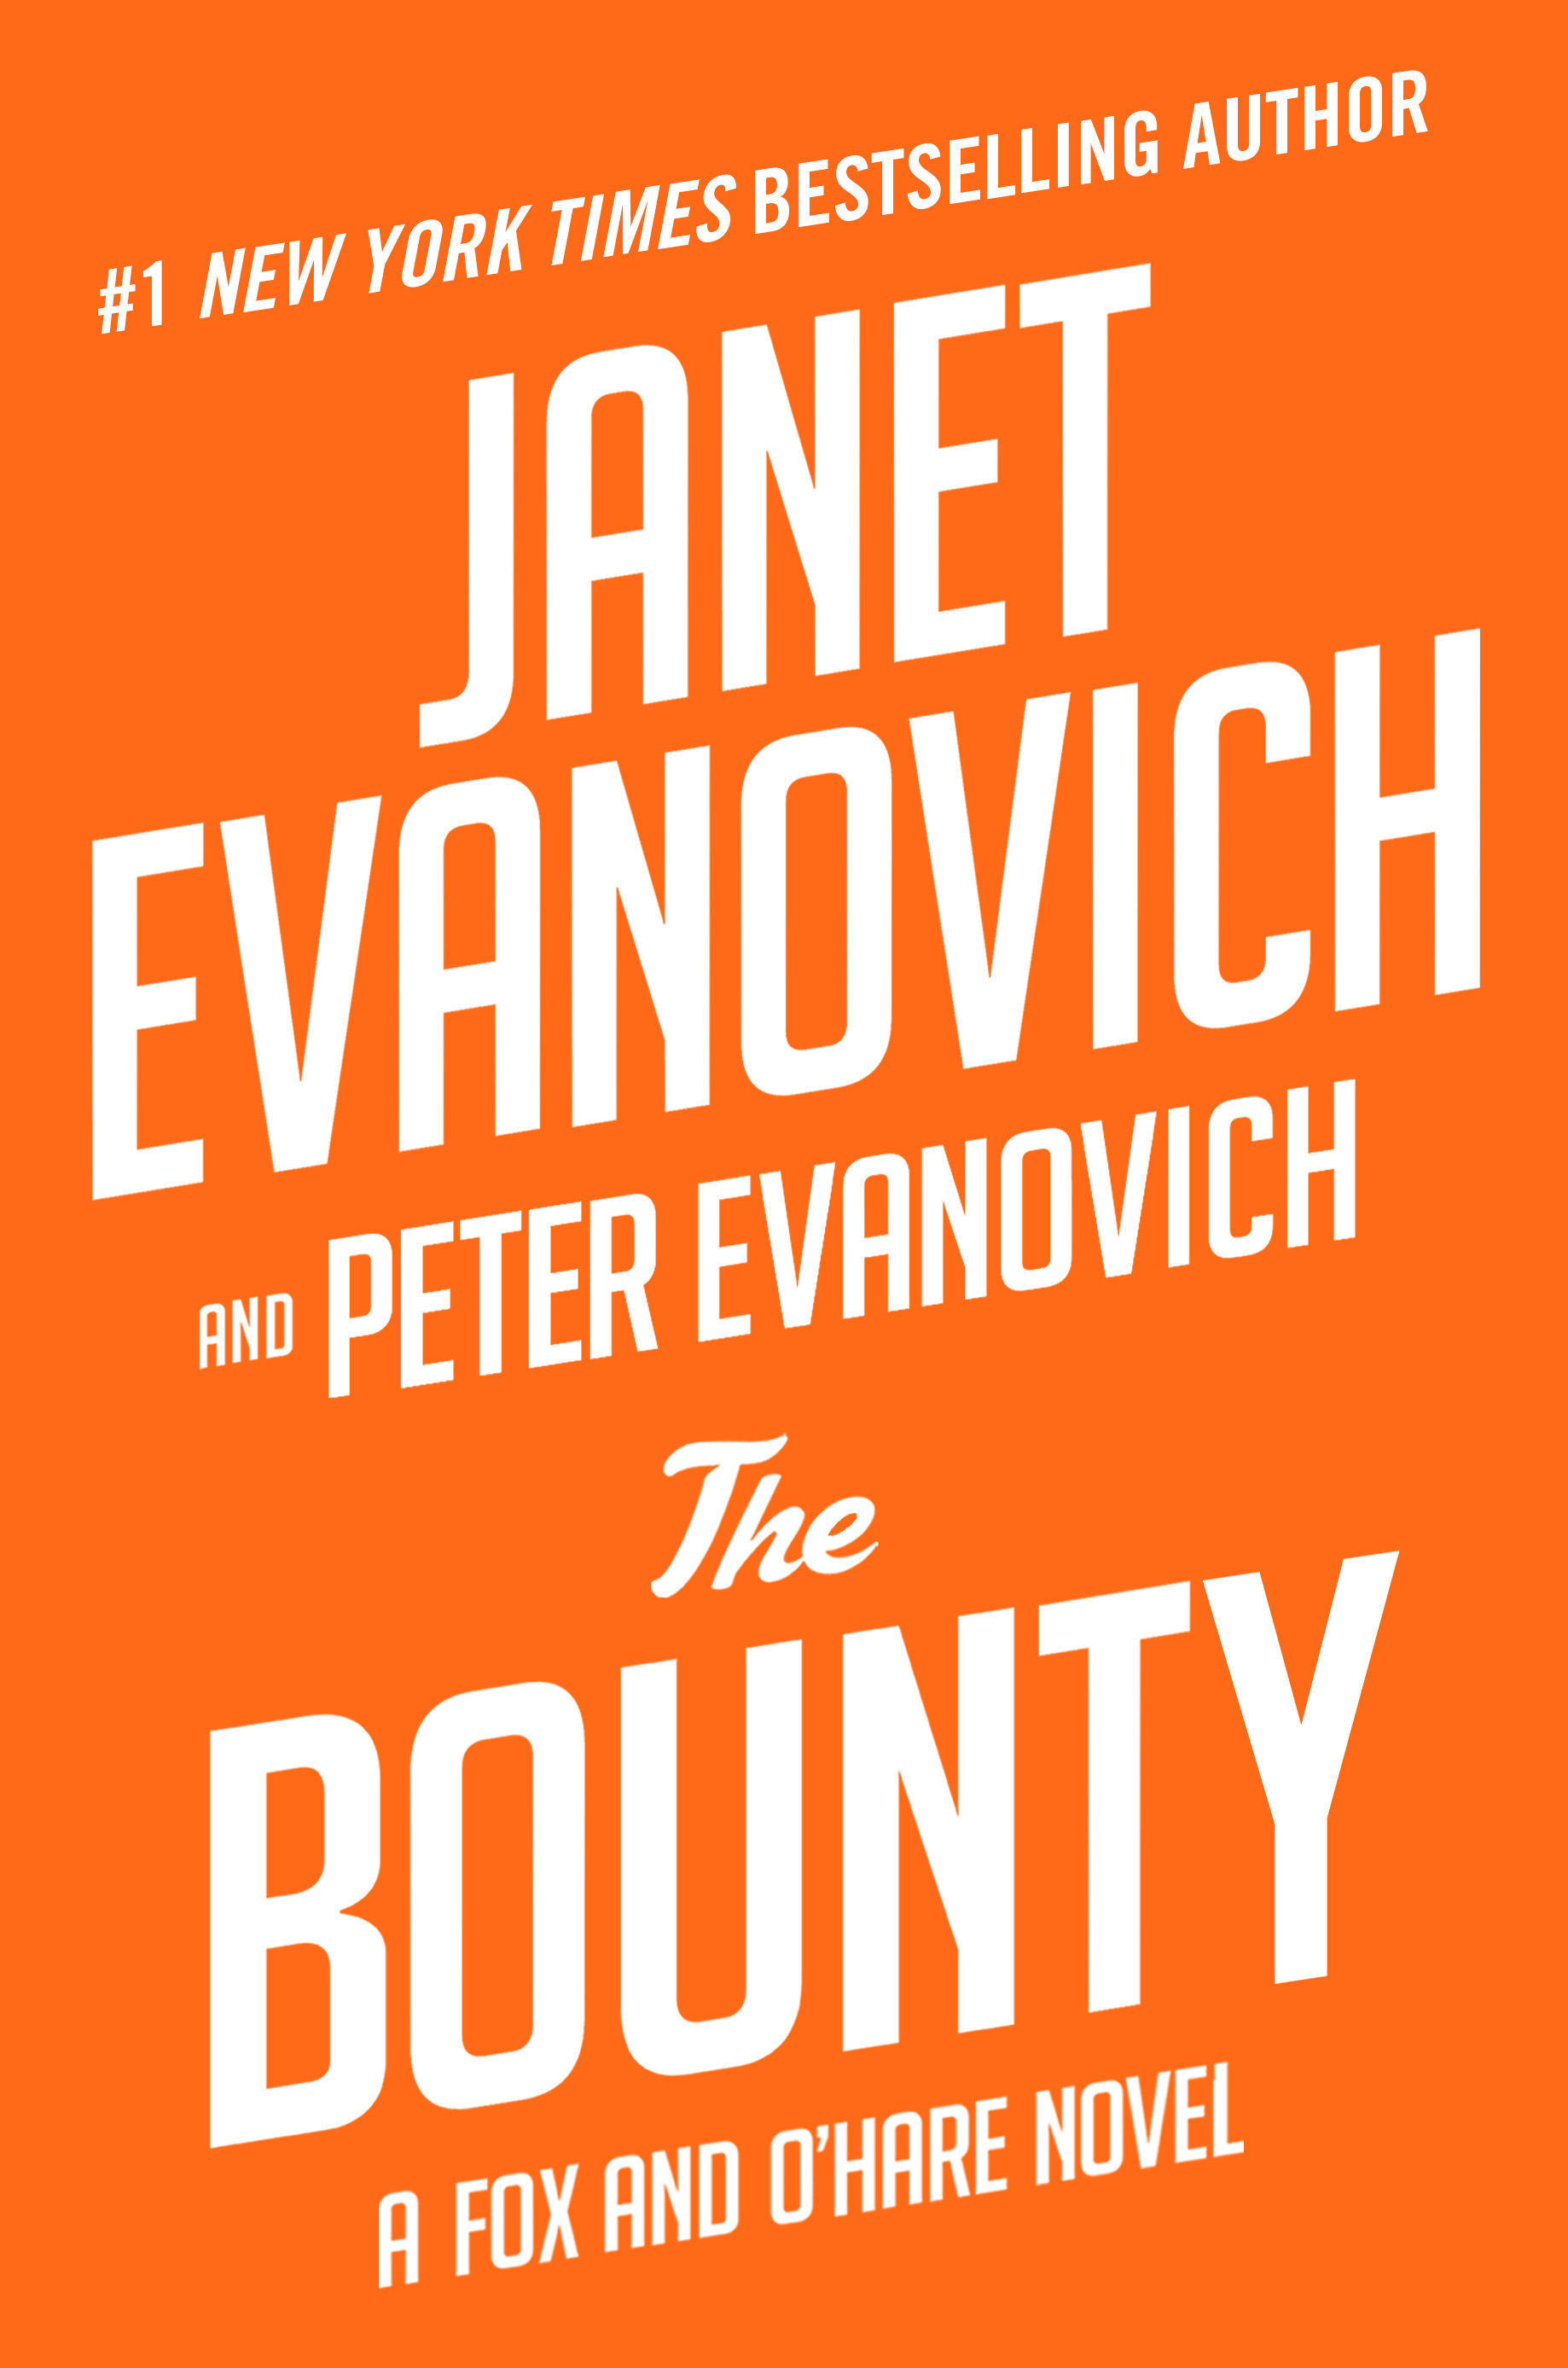 The bounty cover image